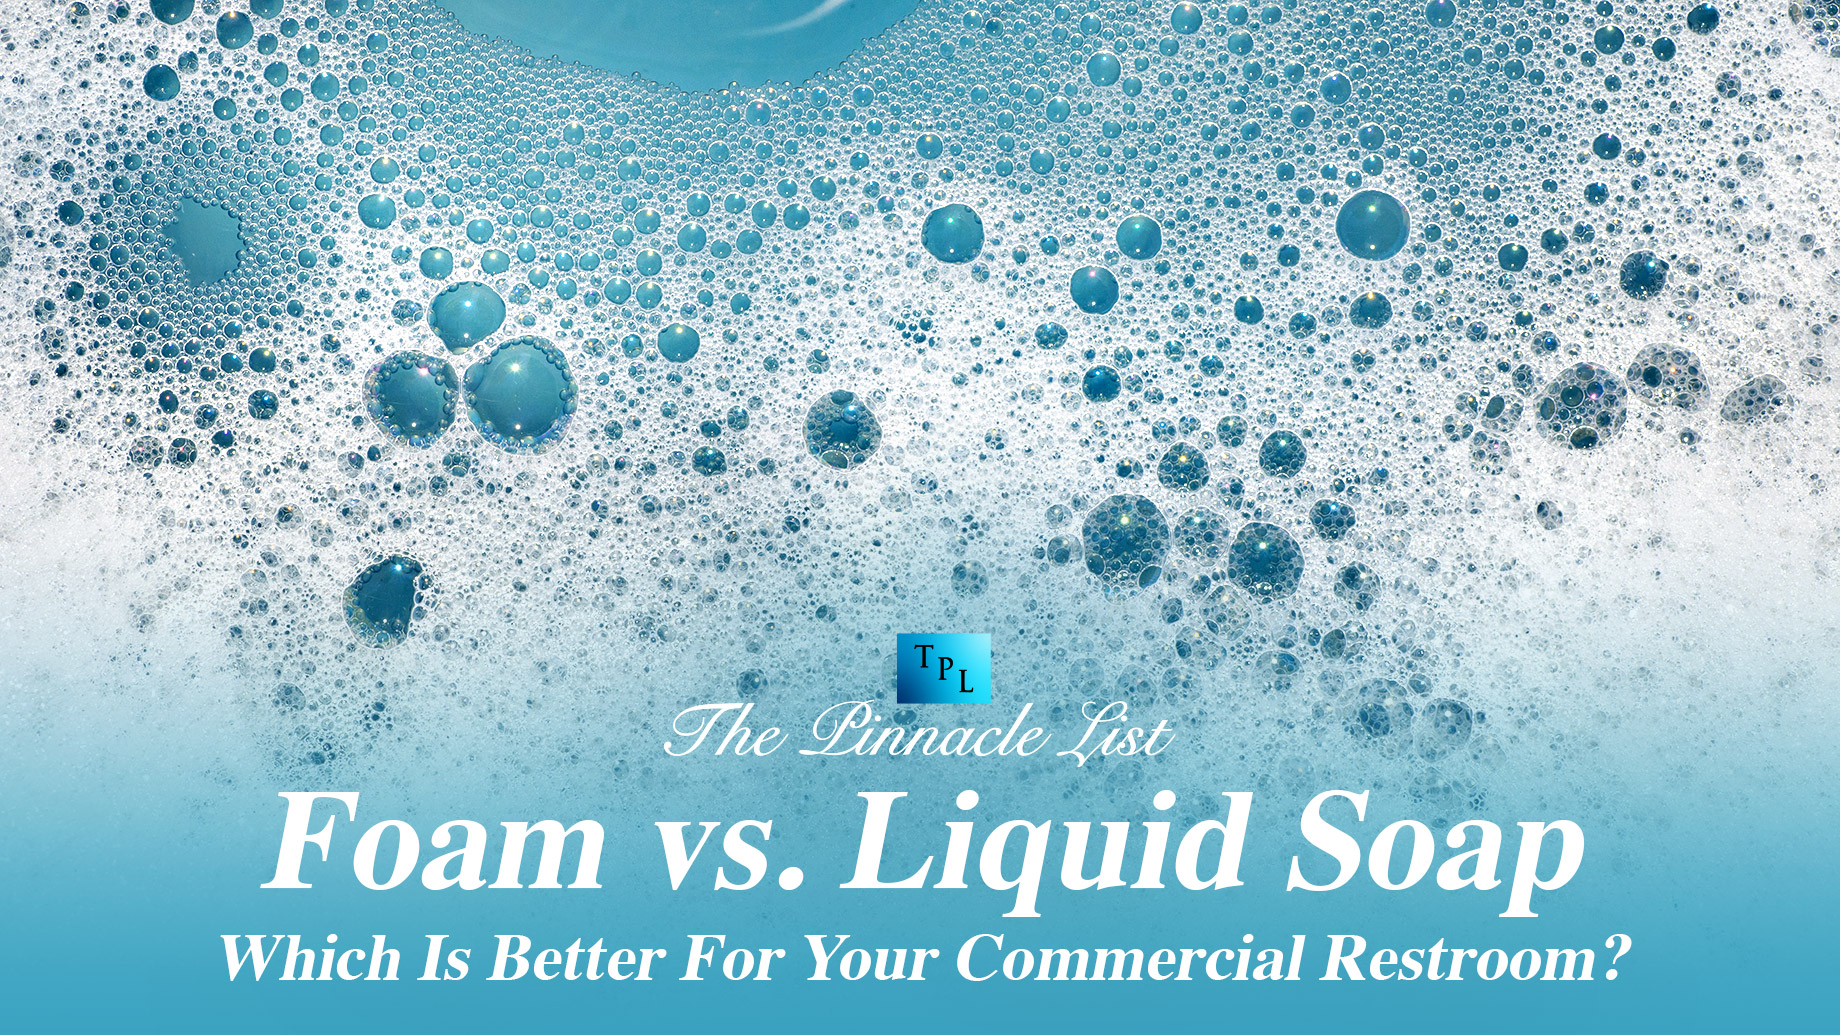 Foam vs. Liquid Soap: Which Is Better For Your Commercial Restroom?